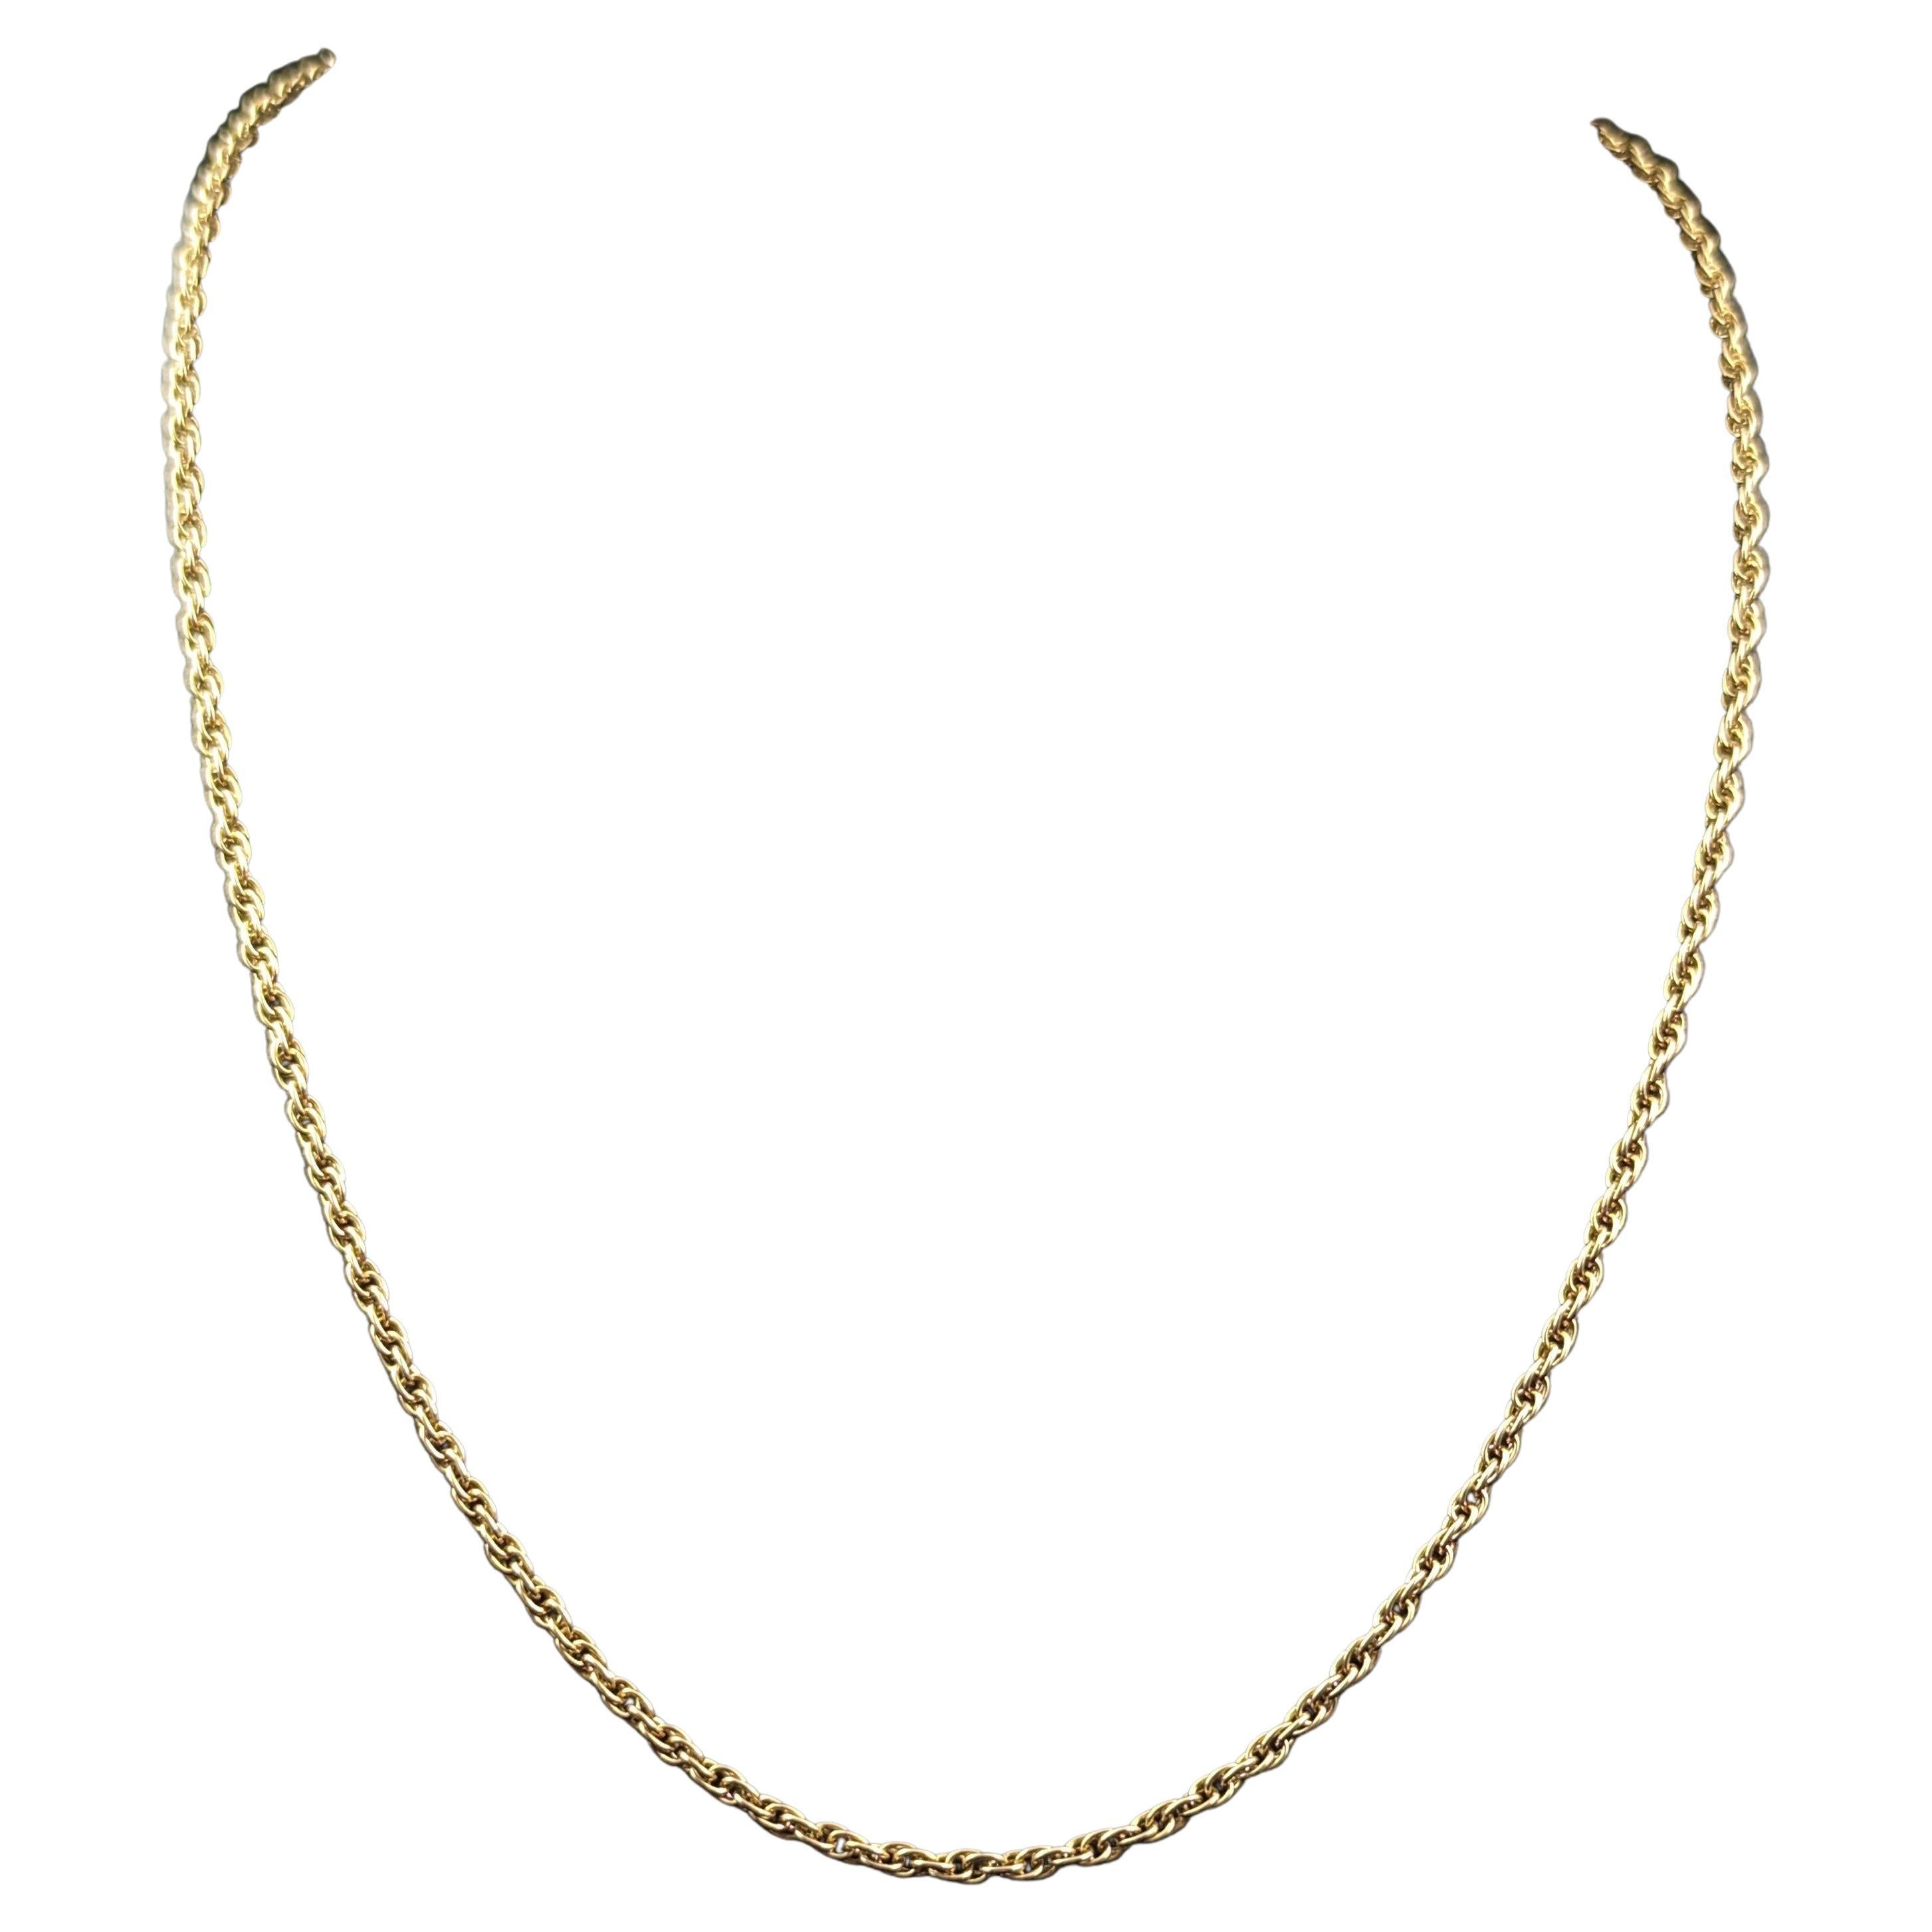 Vintage 9k Yellow Gold Fancy Link Chain Necklace For Sale